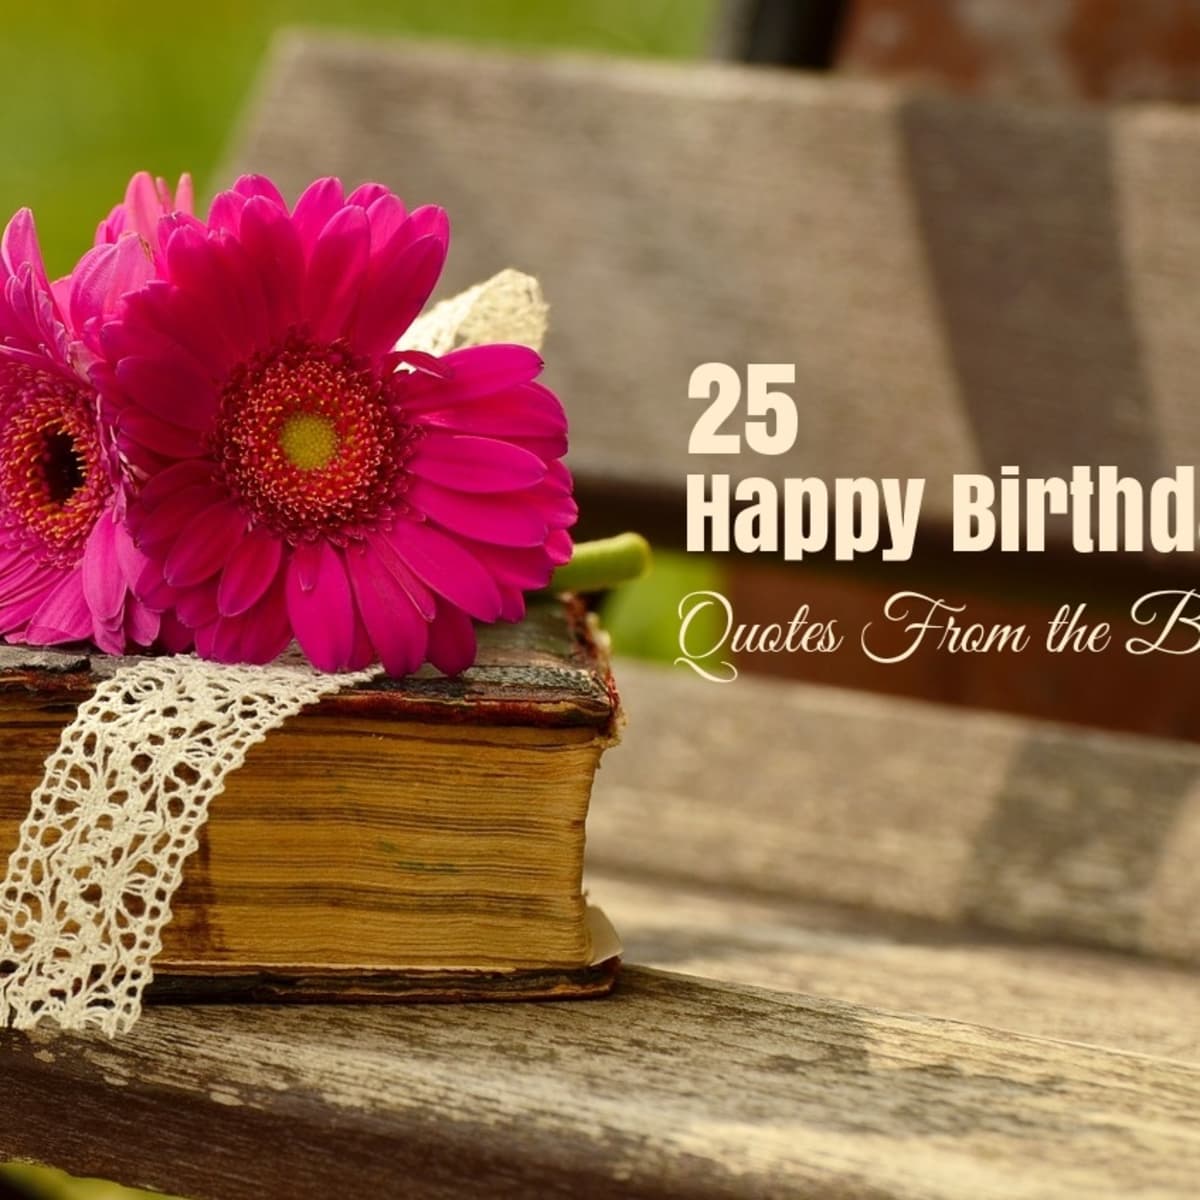 25 Happy Birthday Quotes From The Bible Letterpile